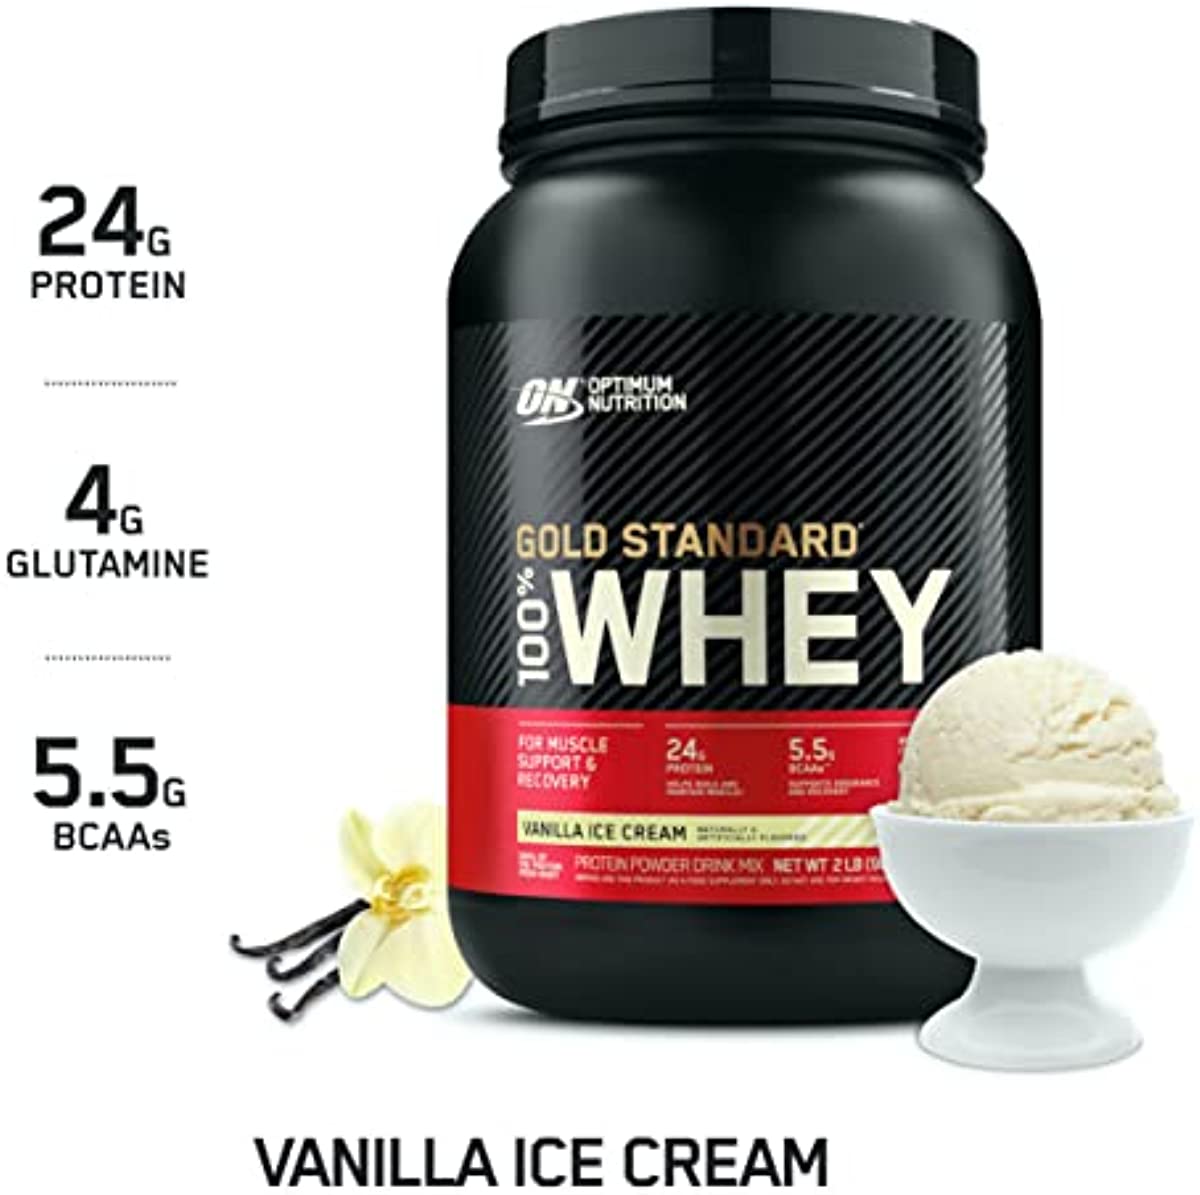 Optimum Nutrition Gold Standard 100{58e4370623e2846cfdba0705e32504bacee2eb066fabc8d9bfc19865a40284f7} Whey Protein Powder, Vanilla Ice Cream, 2 Pound (Packaging May Vary)